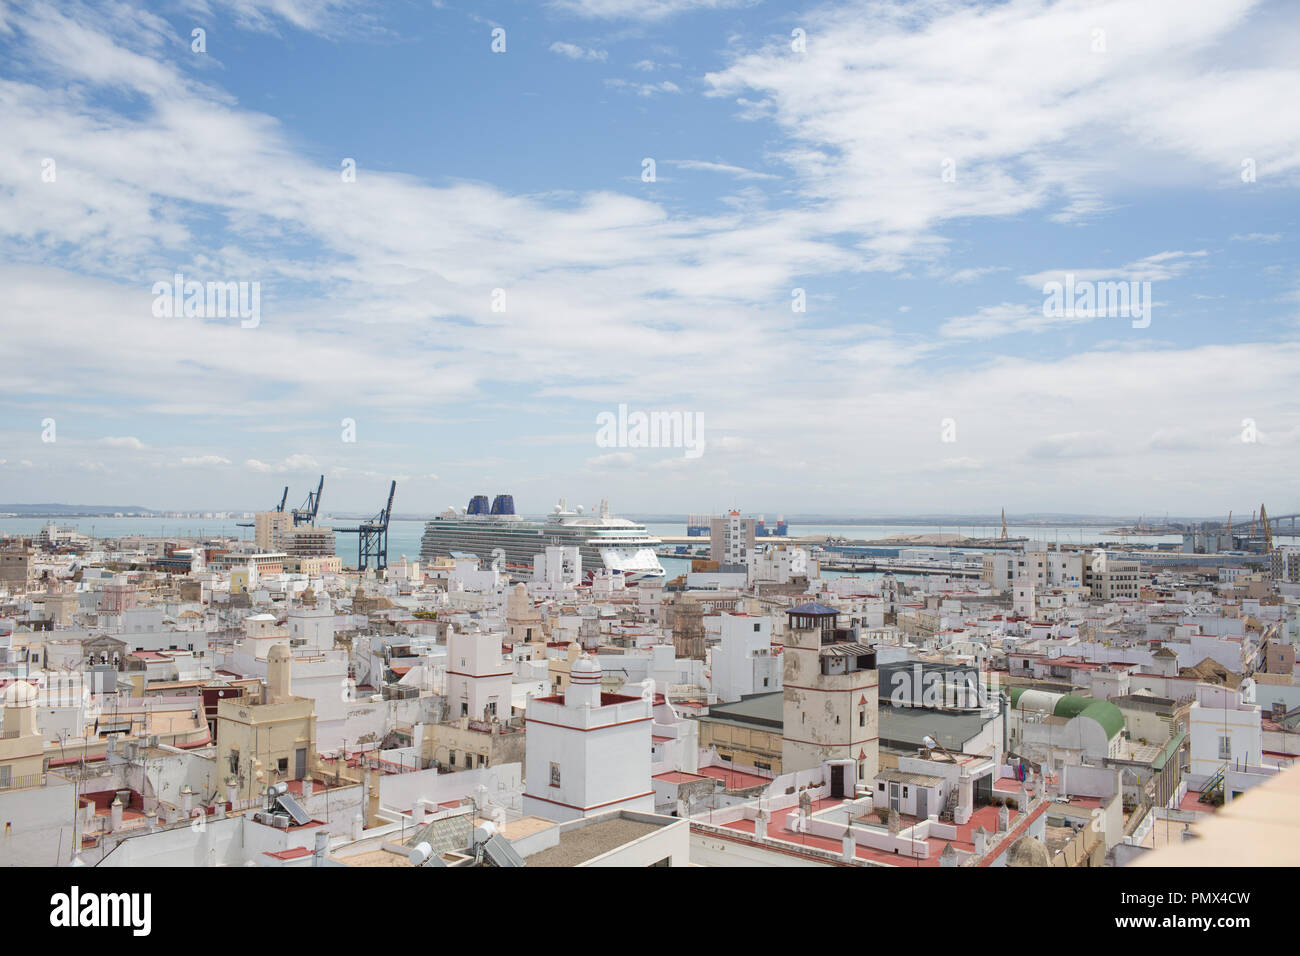 A view looking down on the rooftops of the city of Cadiz in Spain from the Tavira Tower (camera obscura) with a cruise ship in port in the distance Stock Photo